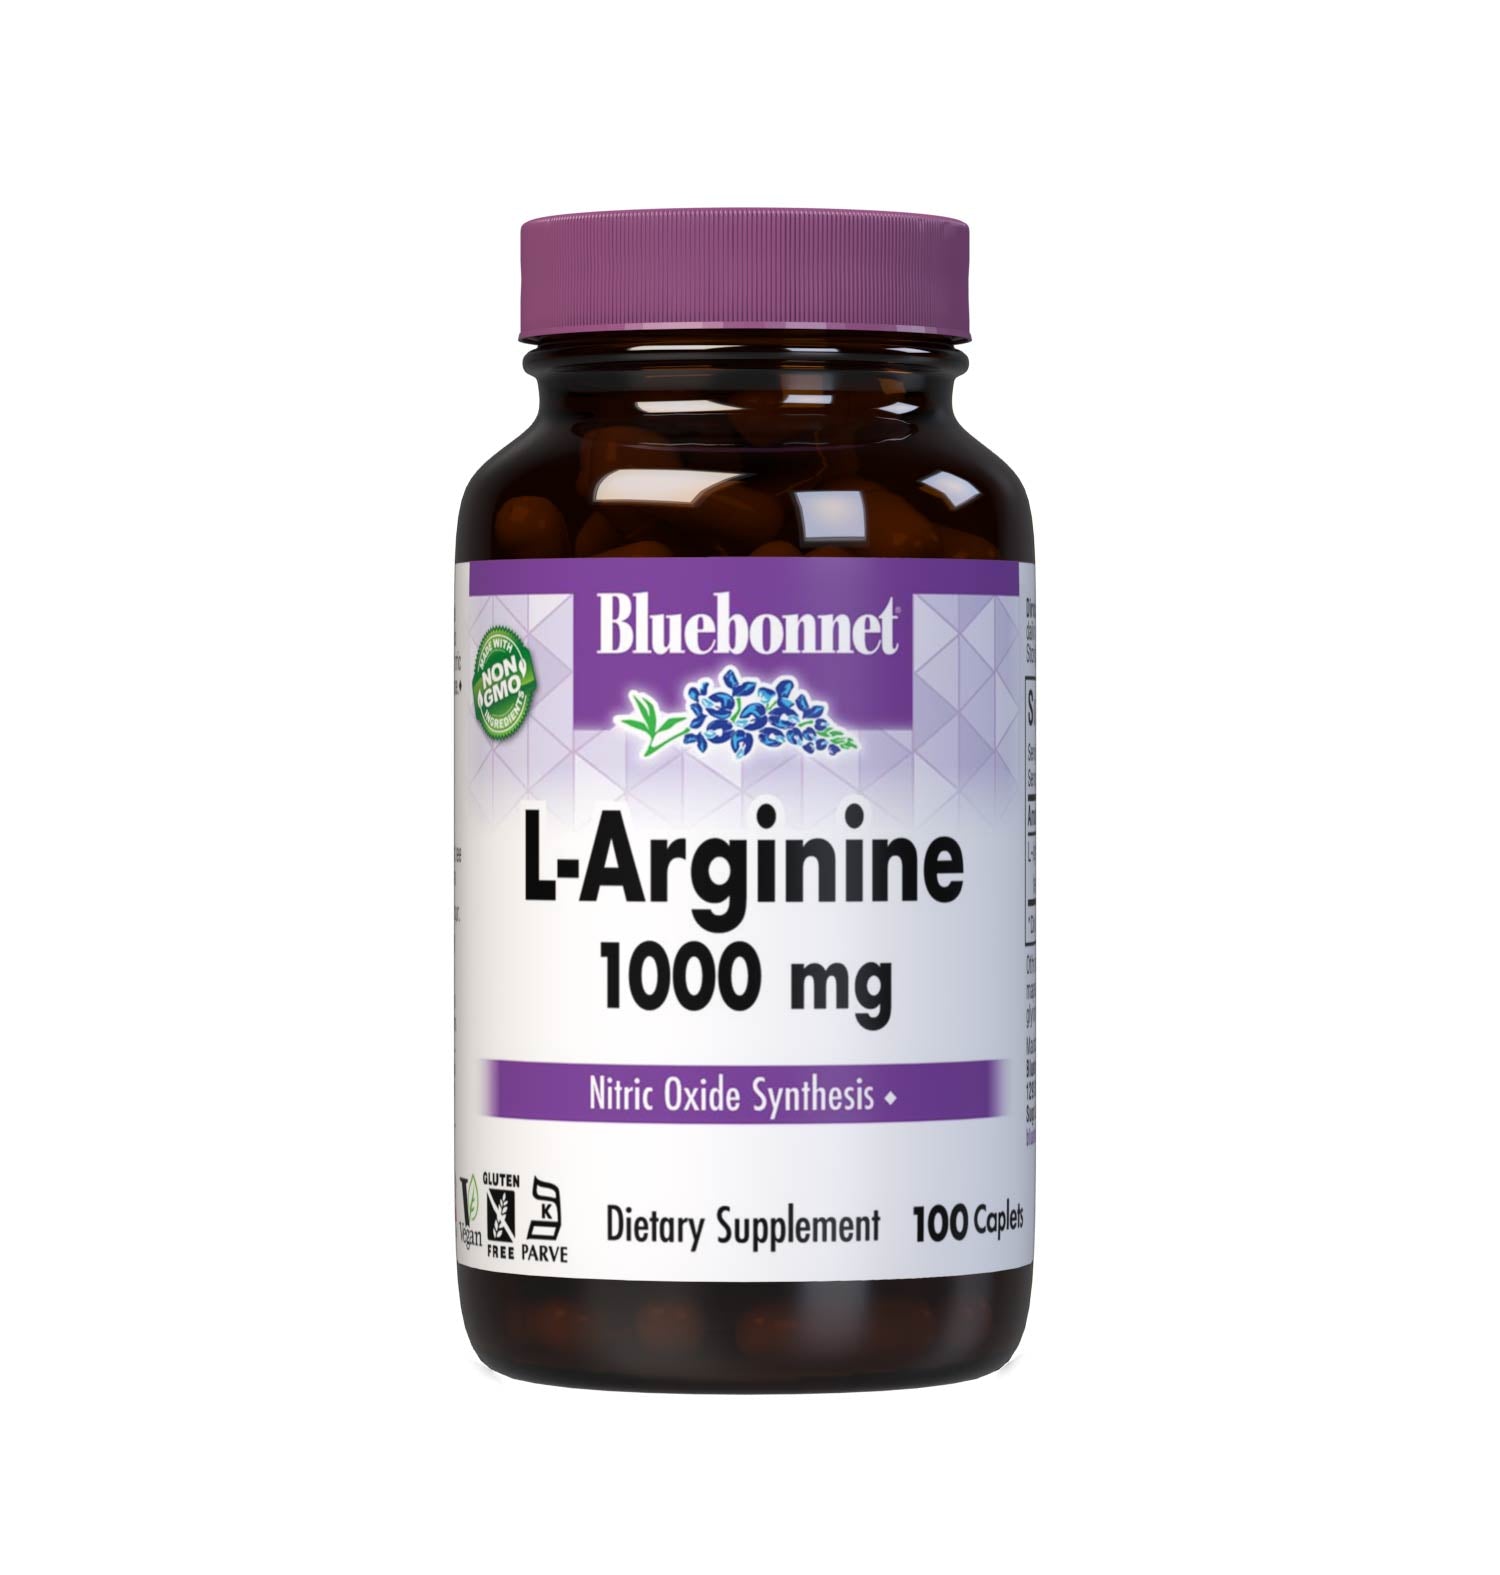 Bluebonnet’s L-Arginine 1000 mg 100 caplets are formulated with the free-form amino acid L-arginine in its crystalline form from Ajinomoto, which supports nitric oxide synthesis and men’s health/performance. #size_100 count